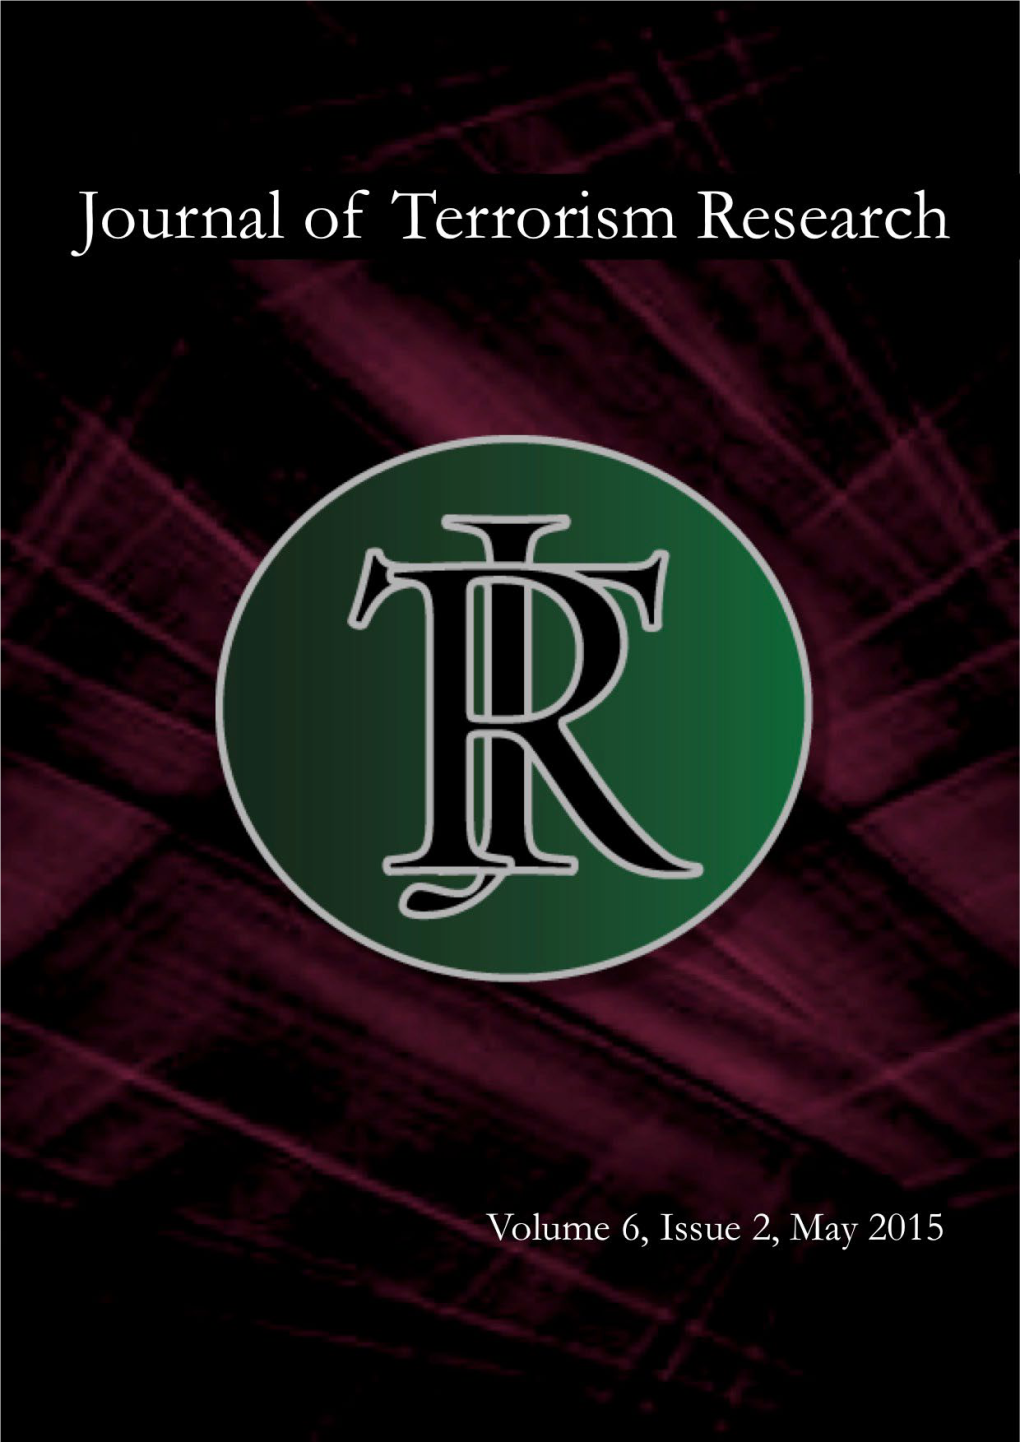 Journal of Terrorism Research, Volume 6, Issue 2.Pdf